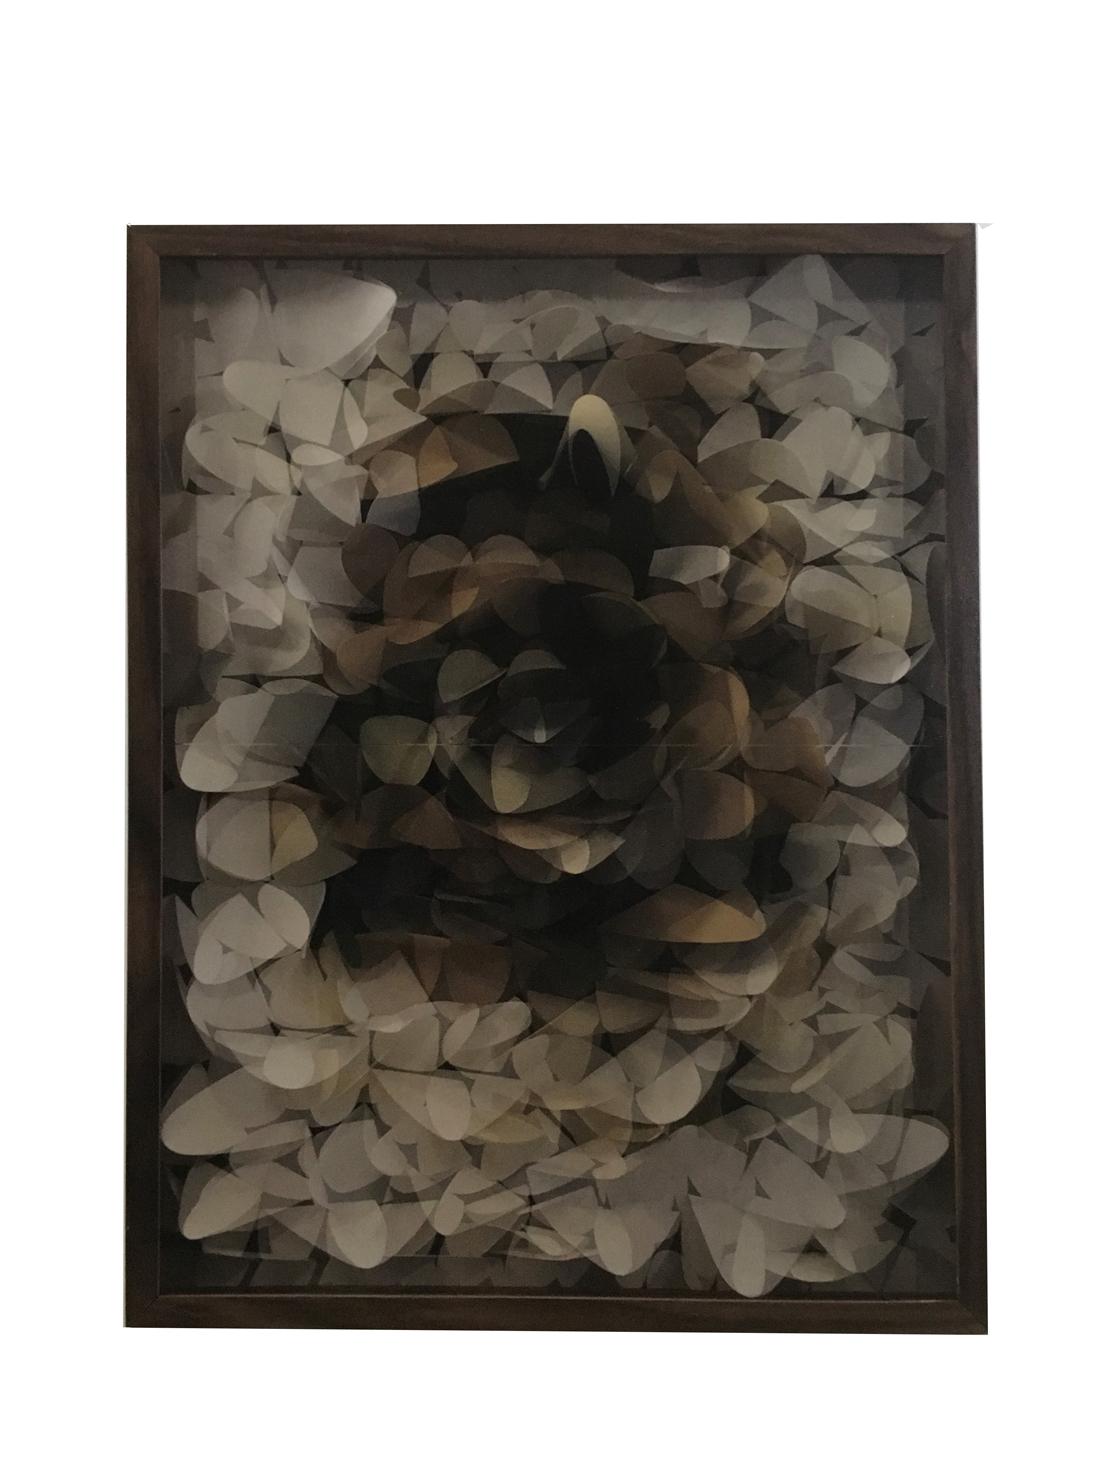 Italy Mixed Media Abstract Paper Flower Assemblage Under Lenticular Lens